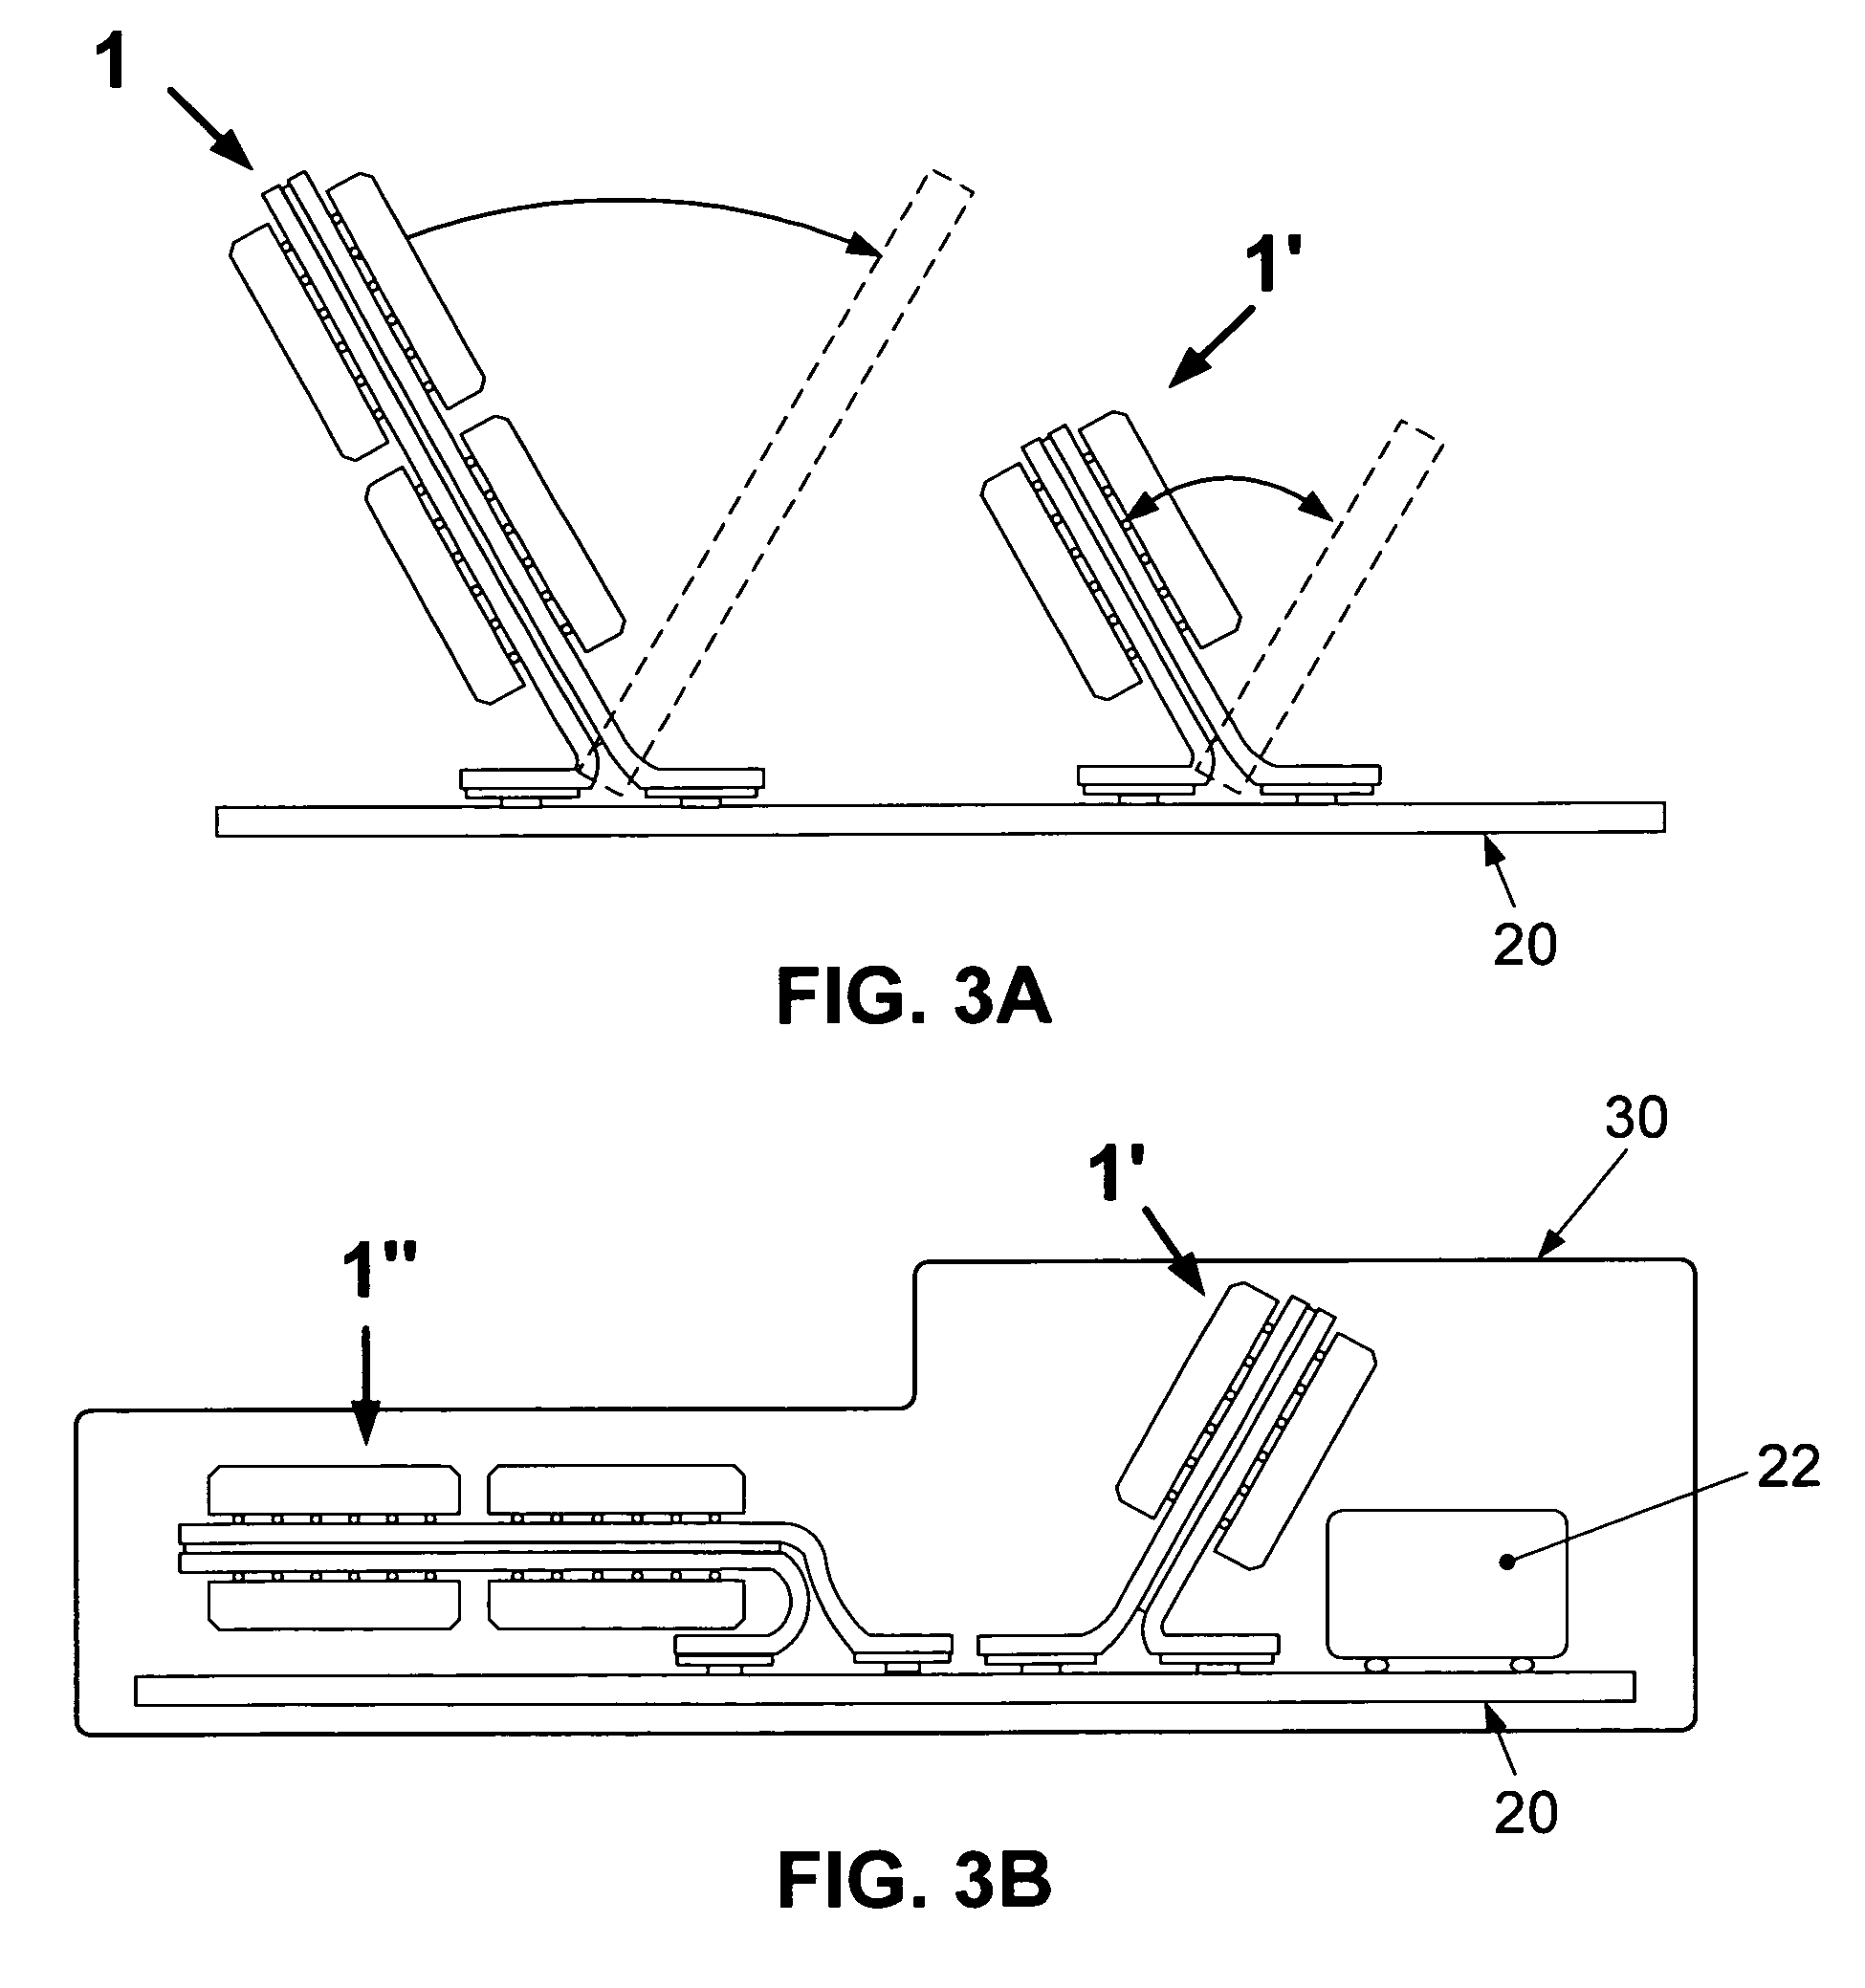 Electronic module with heat spreading enclosure